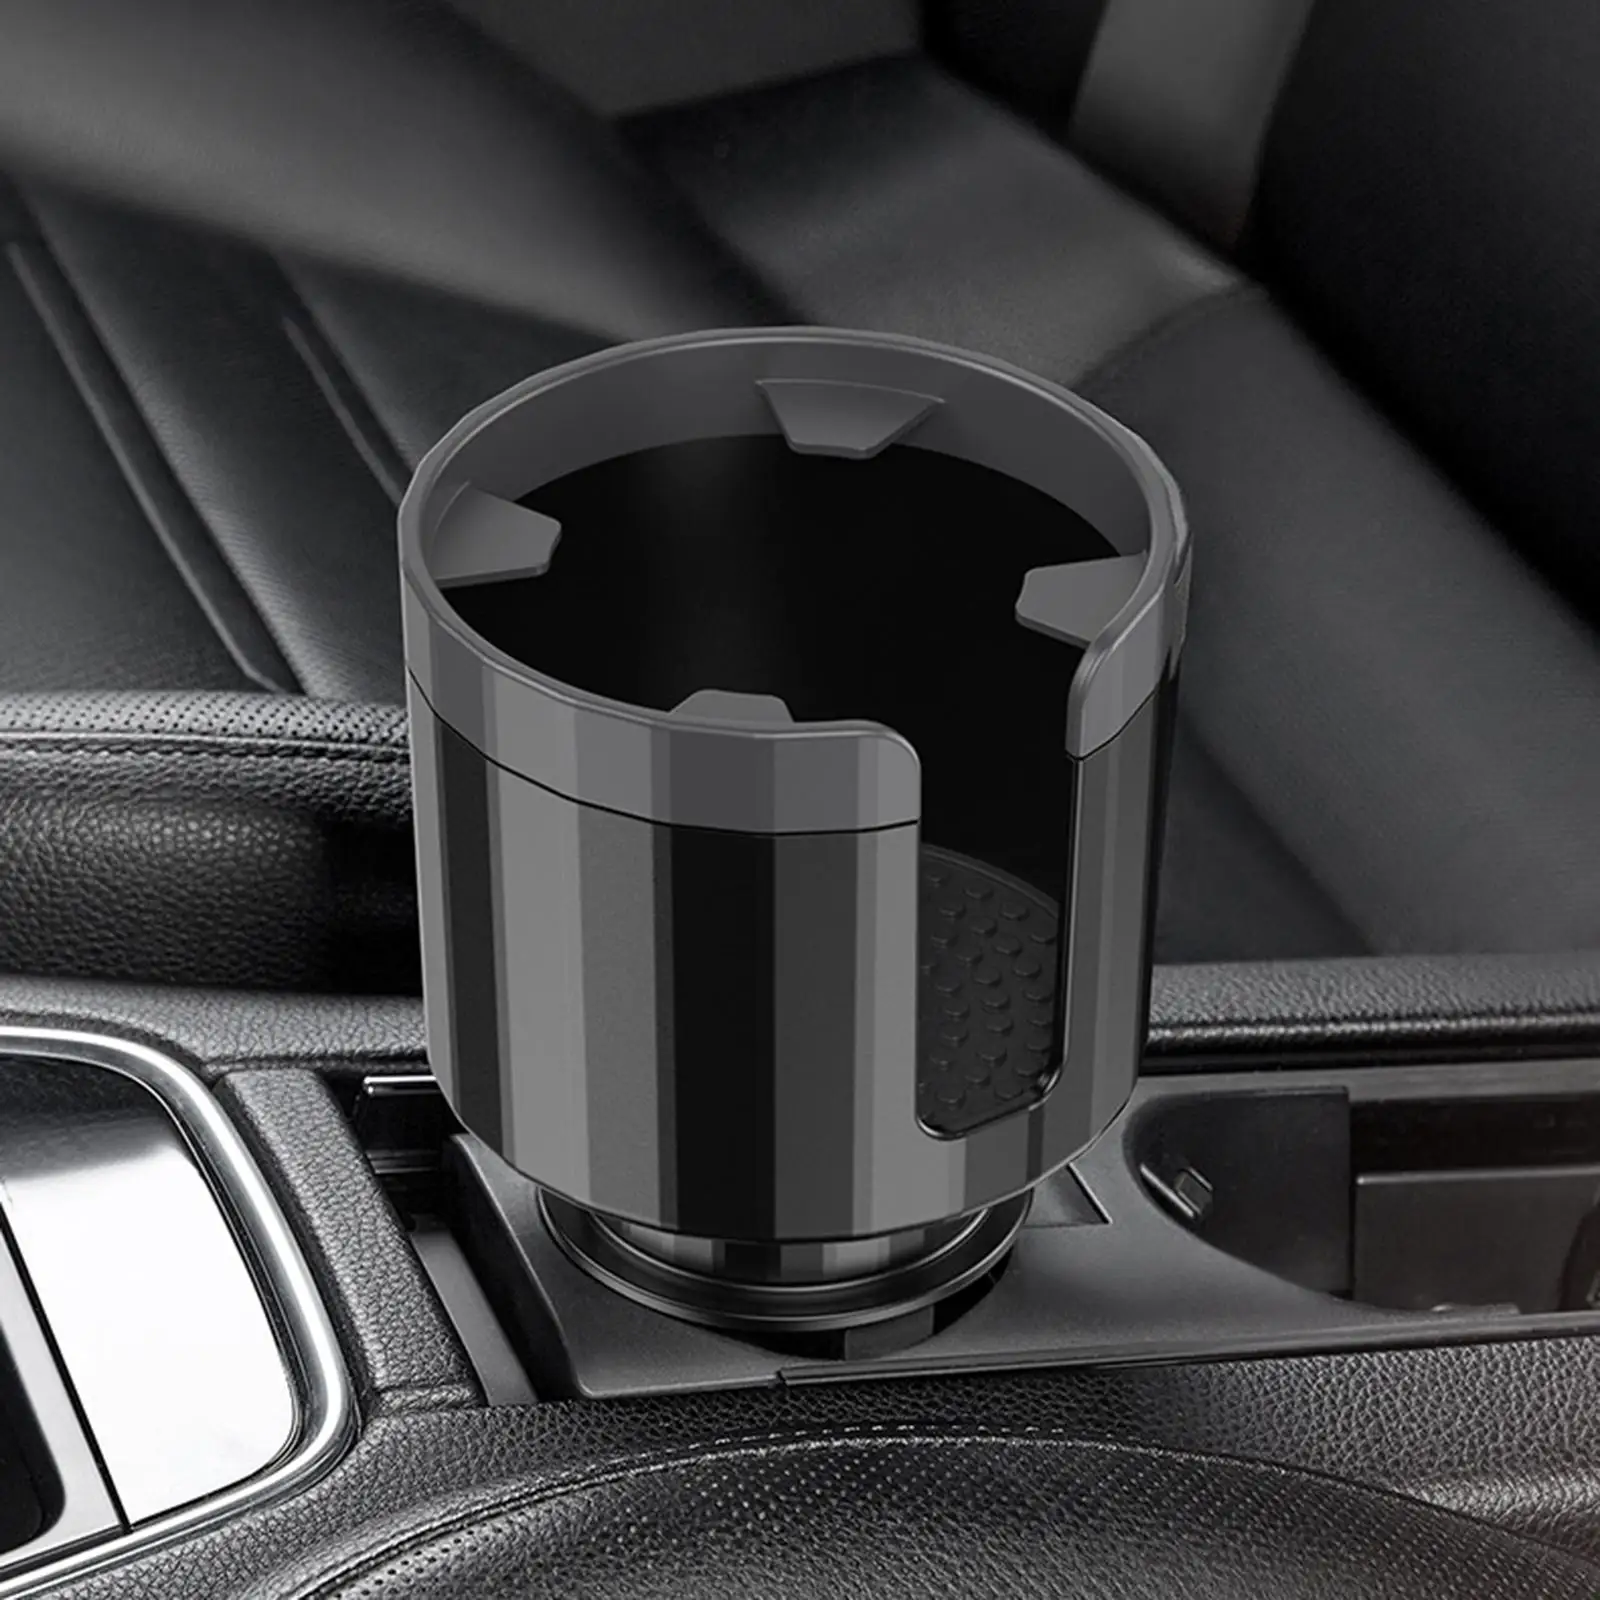 Car Cup Holder Expander Adapter Organizer Adjustable Cup Holder Insert Water Cup Holder Fit for Cups Durable High Performance